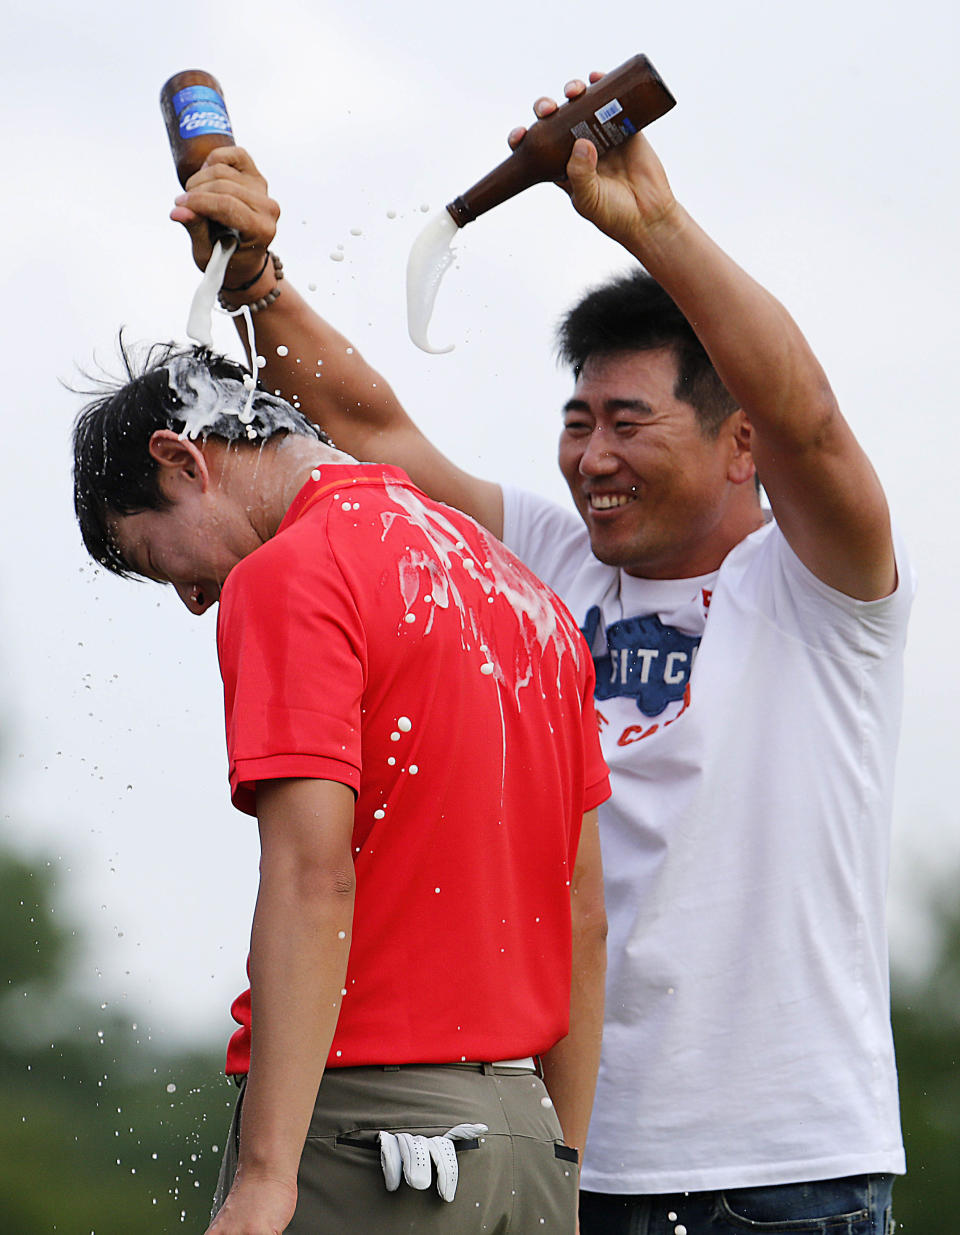 South Korean golfers Y.E. Yang douses Noh Seung-yul, right, with beer on the 18th green after Noh won the Zurich Classic golf tournament at TPC Louisiana in Avondale, La., Sunday, April 27, 2014.(AP Photo/Bill Haber)